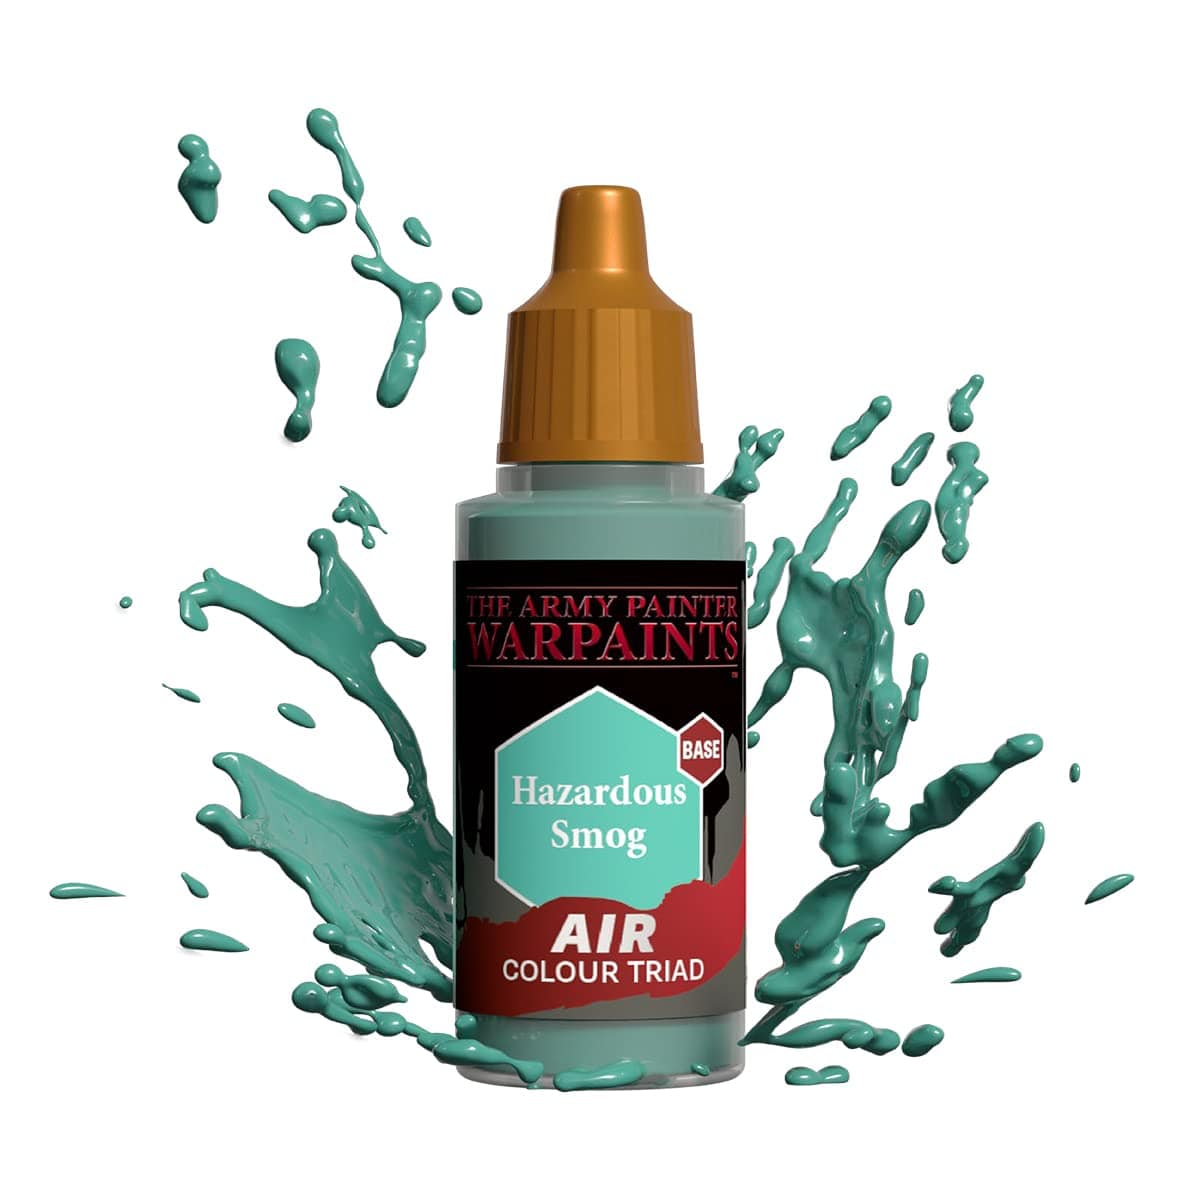 The Army Painter Accessories The Army Painter Warpaints Air: Hazardous Smog 18ml